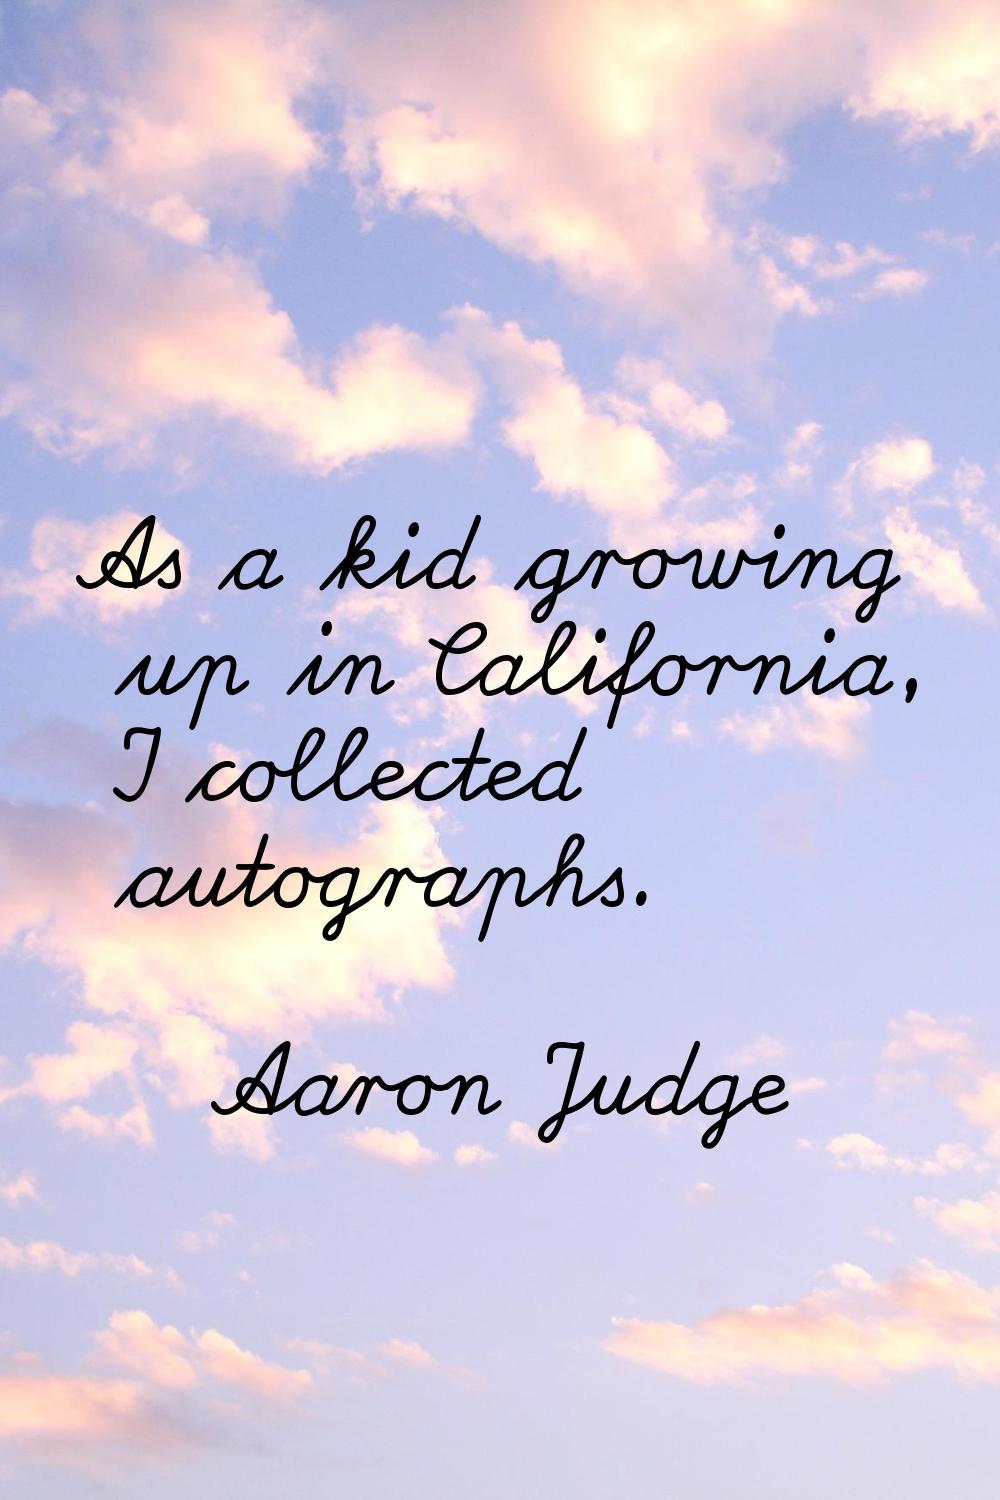 As a kid growing up in California, I collected autographs.